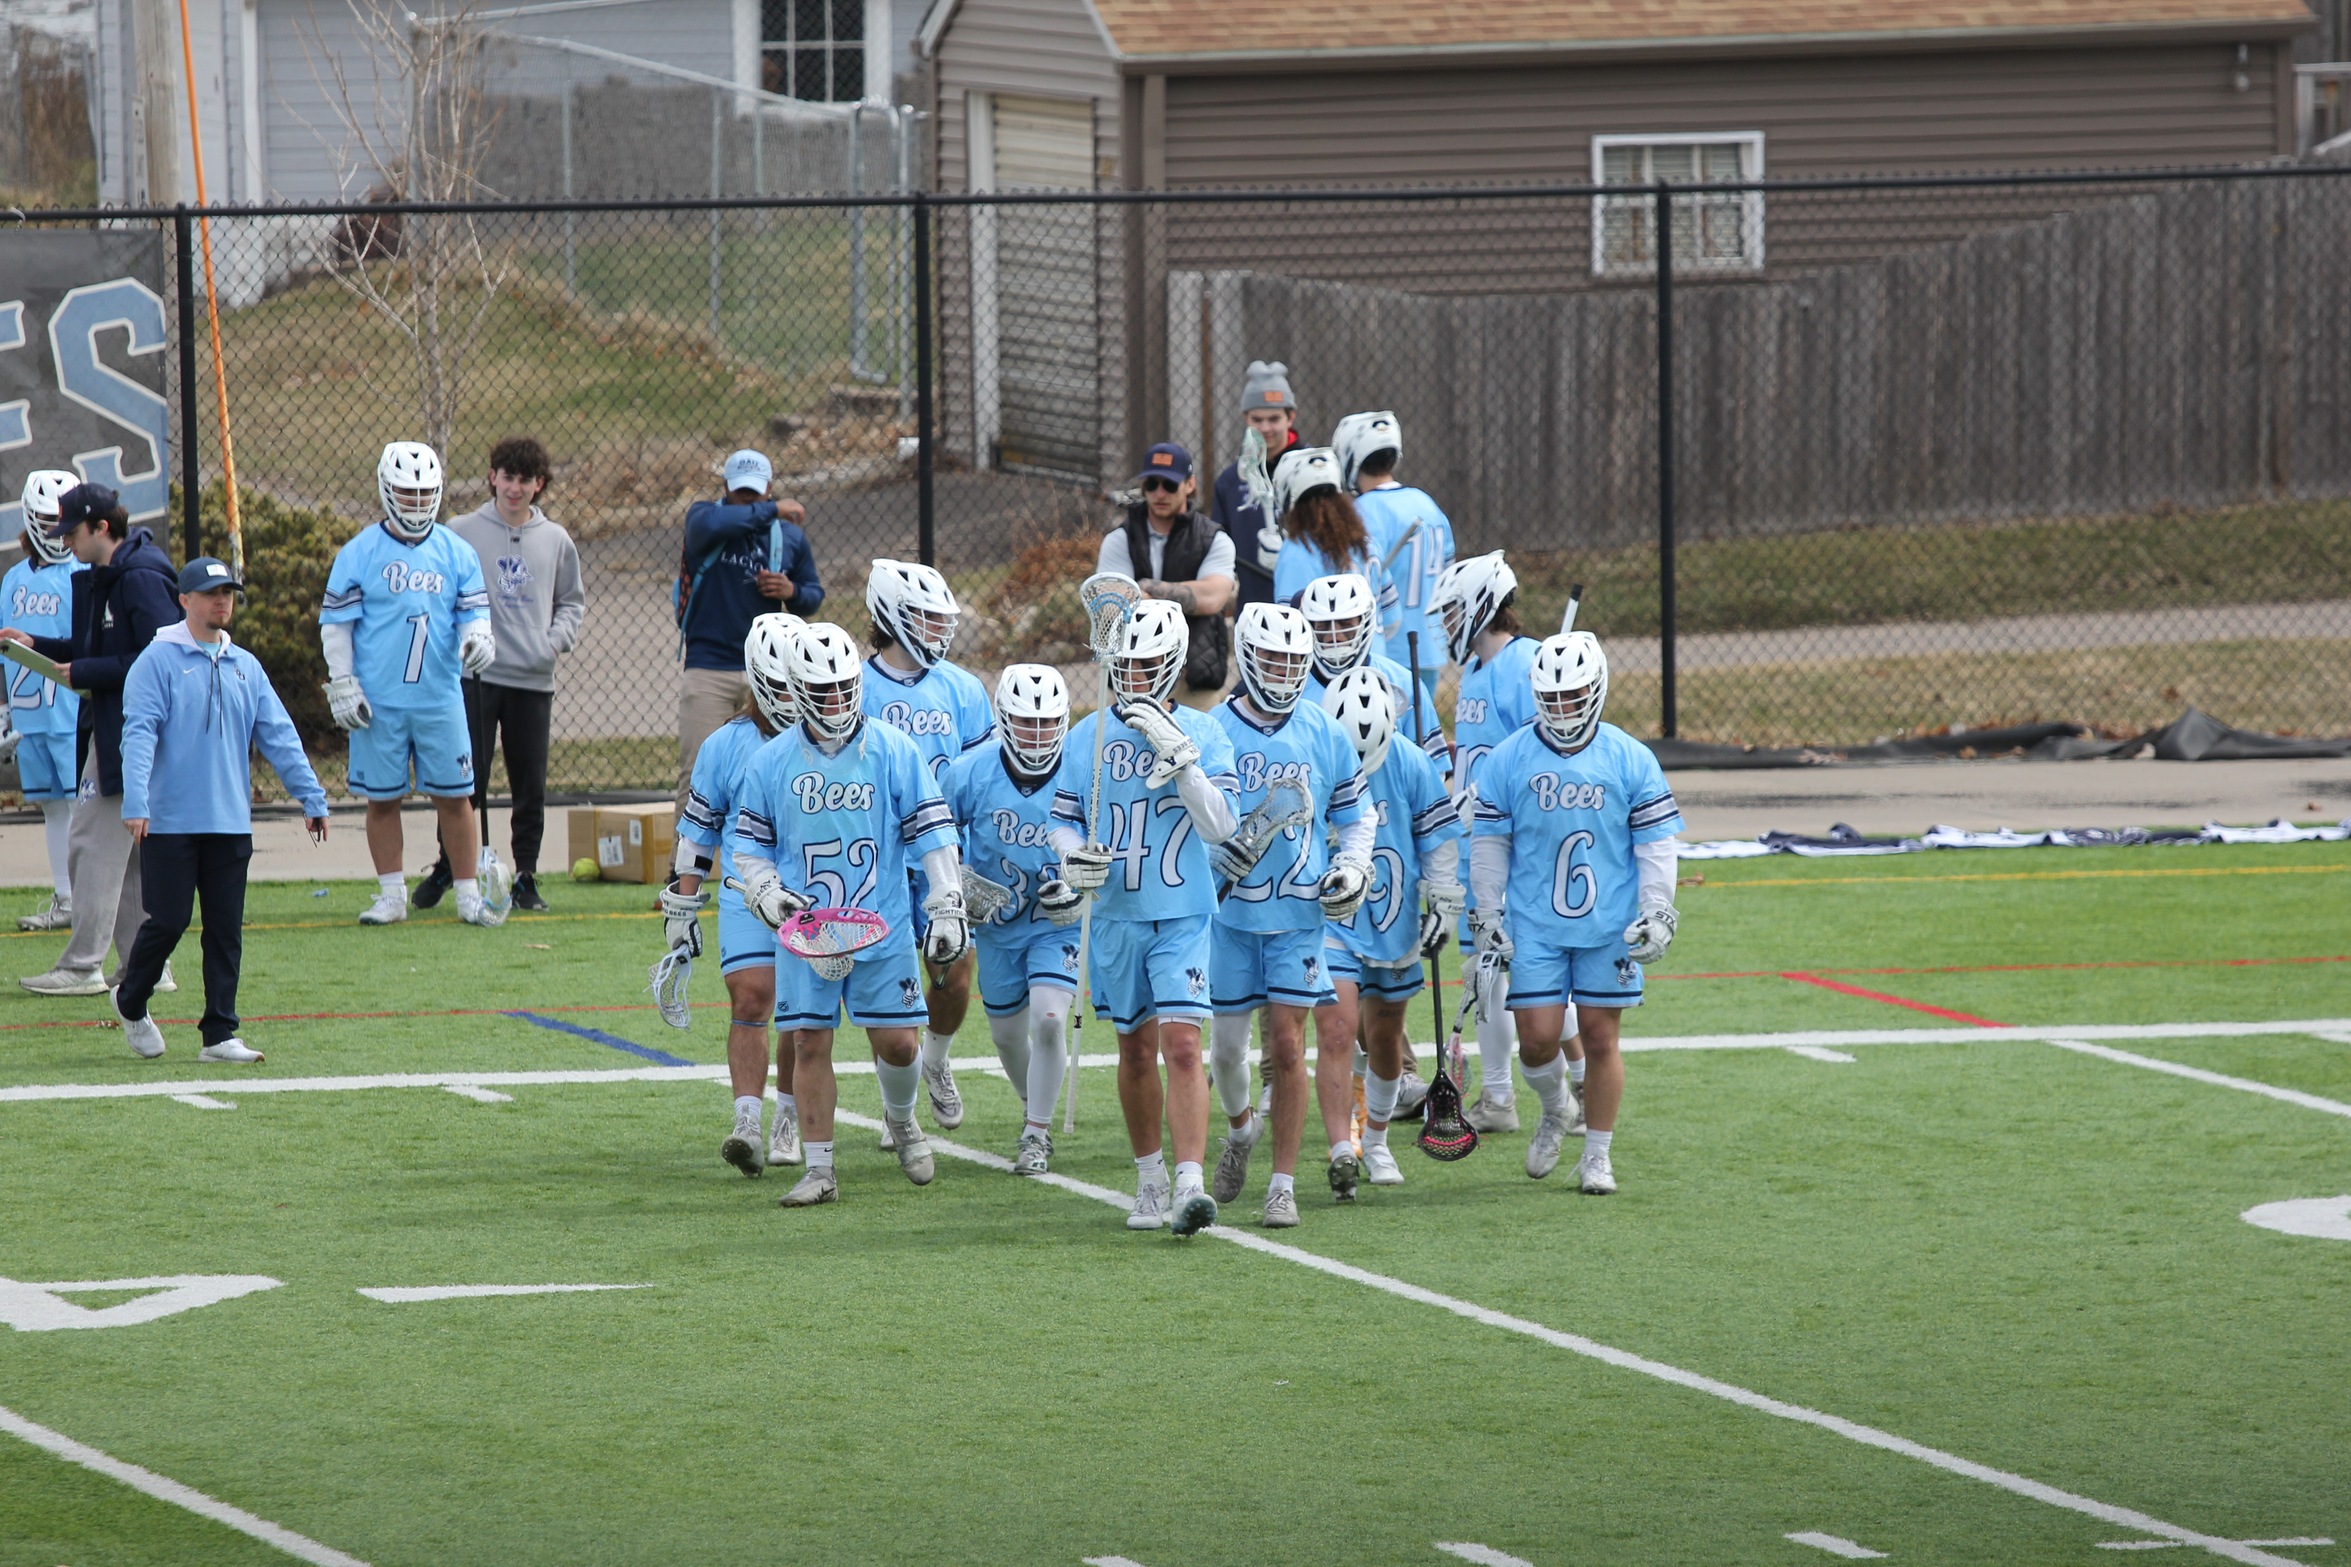 Heart of America Conference Tournament Preview - Men's Lacrosse